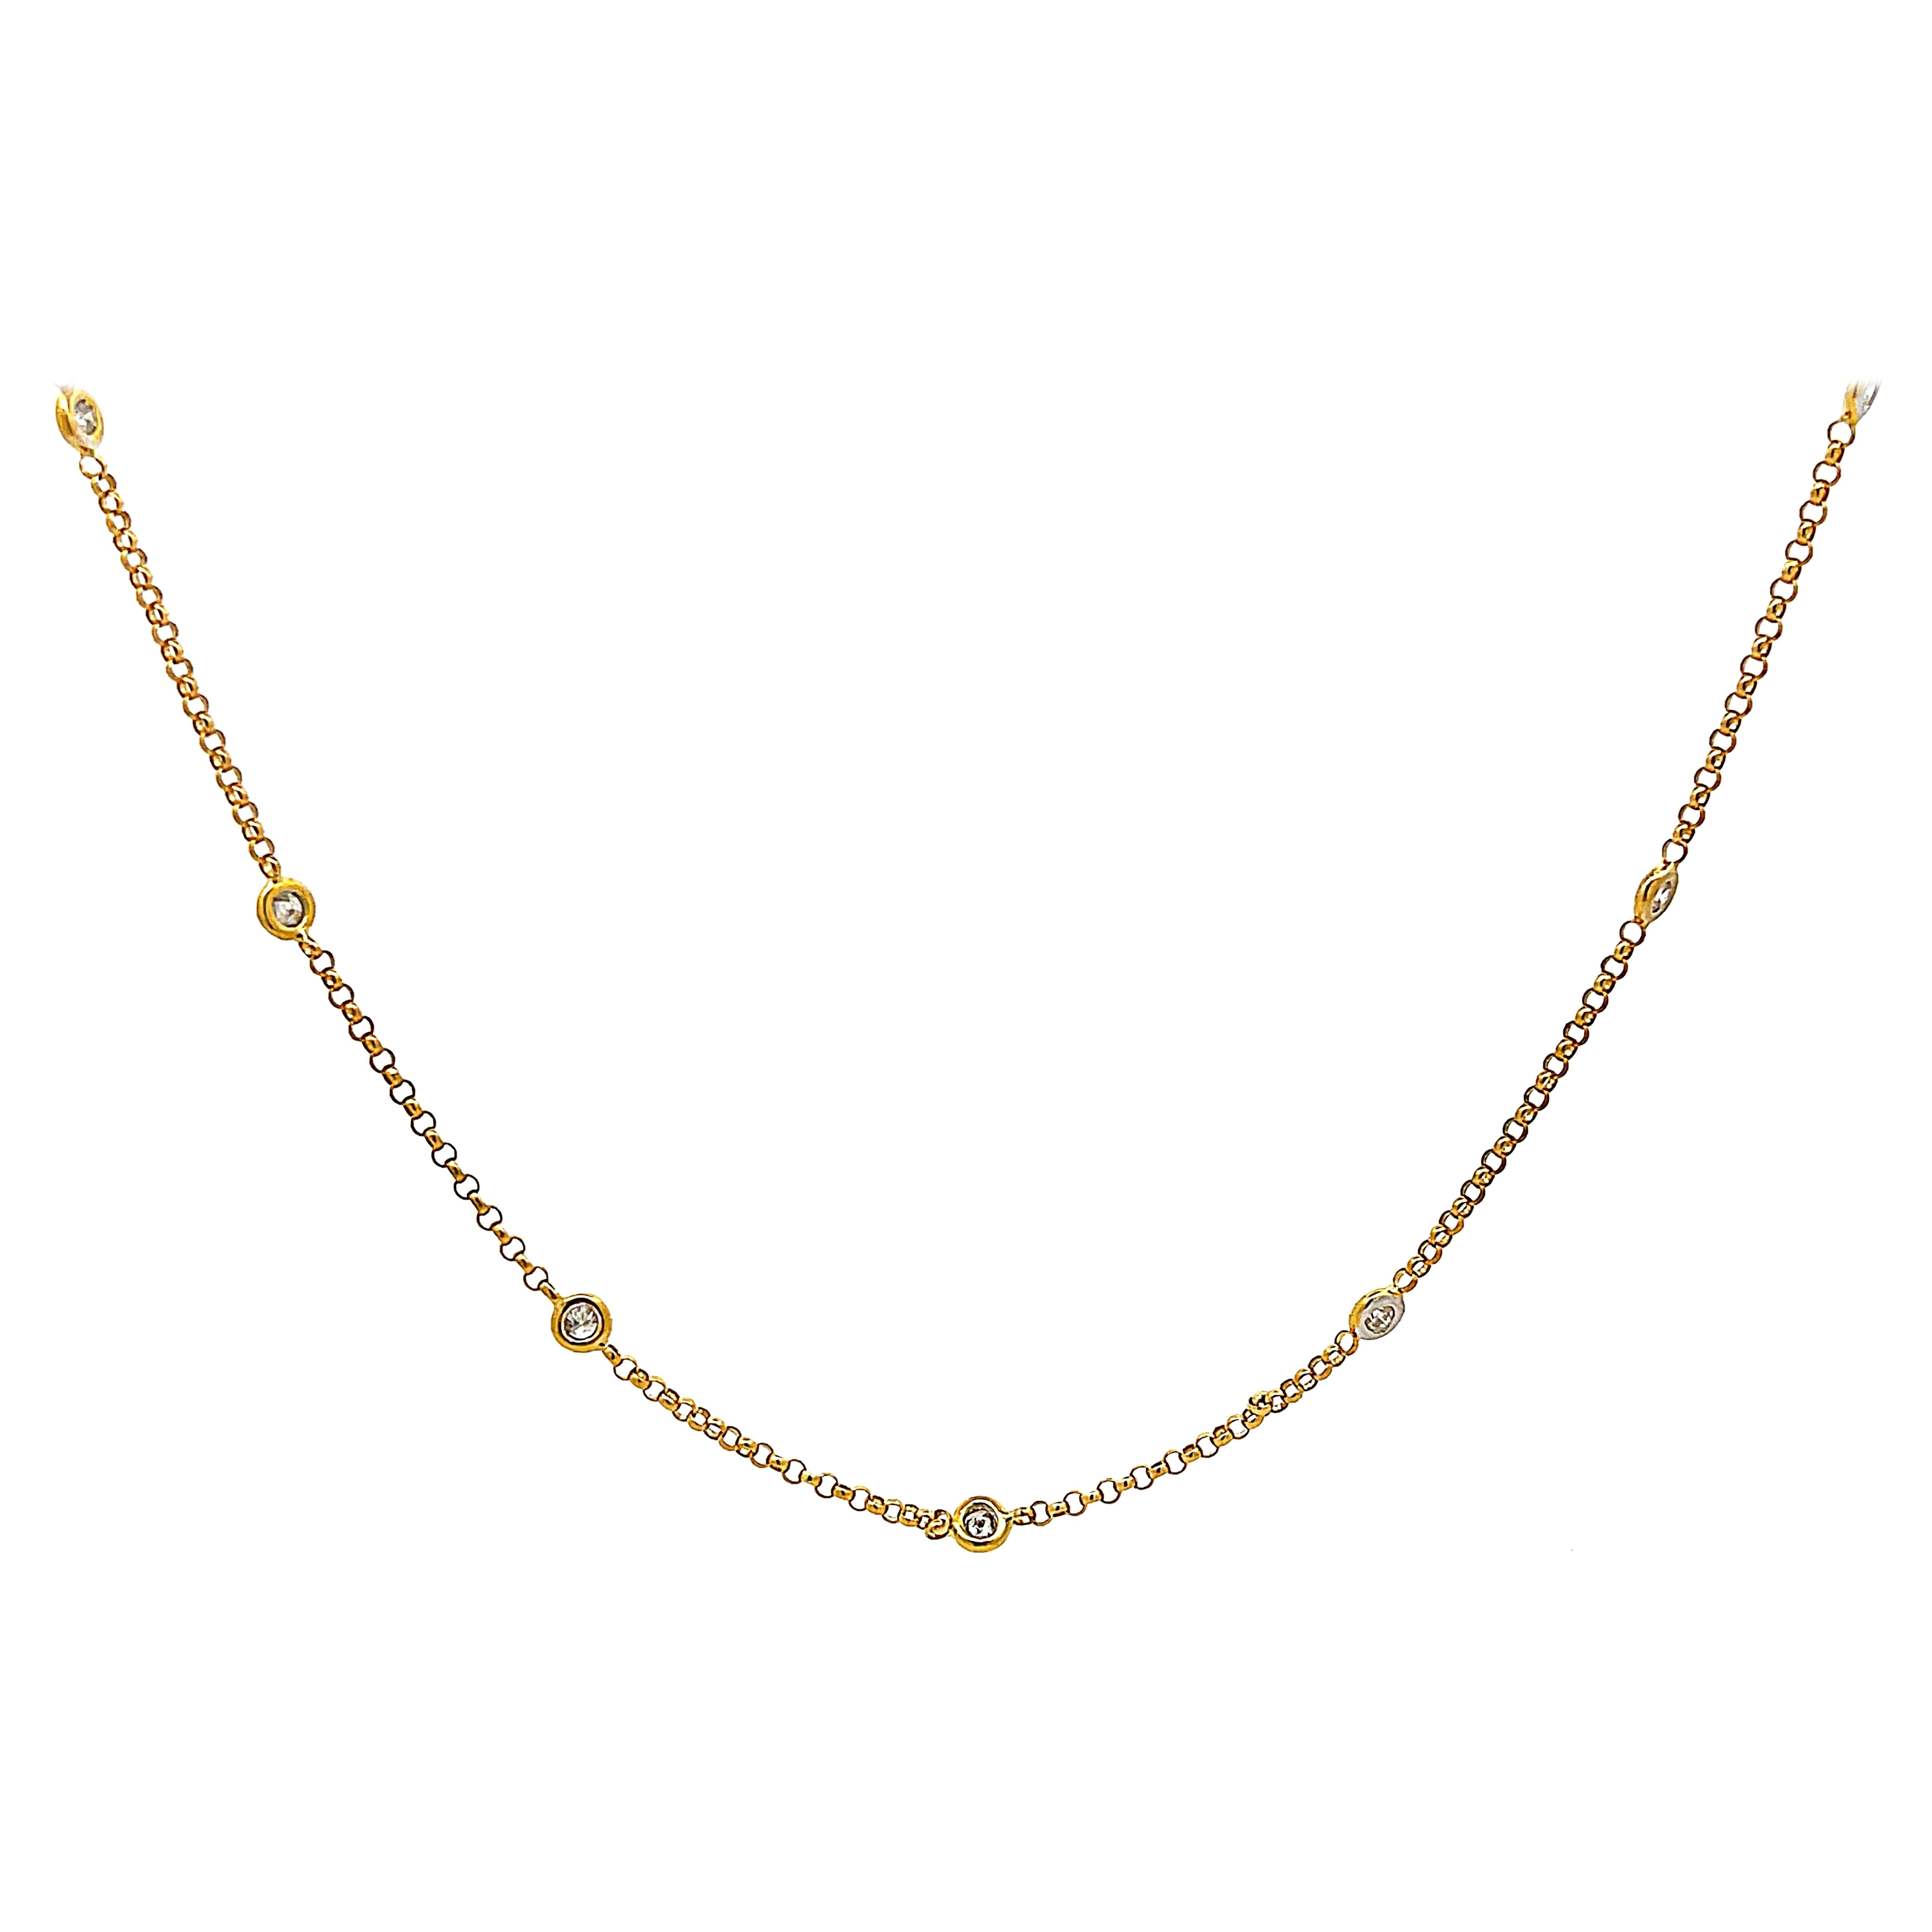 Diamonds by the Yard Necklace in 18k Yellow Gold